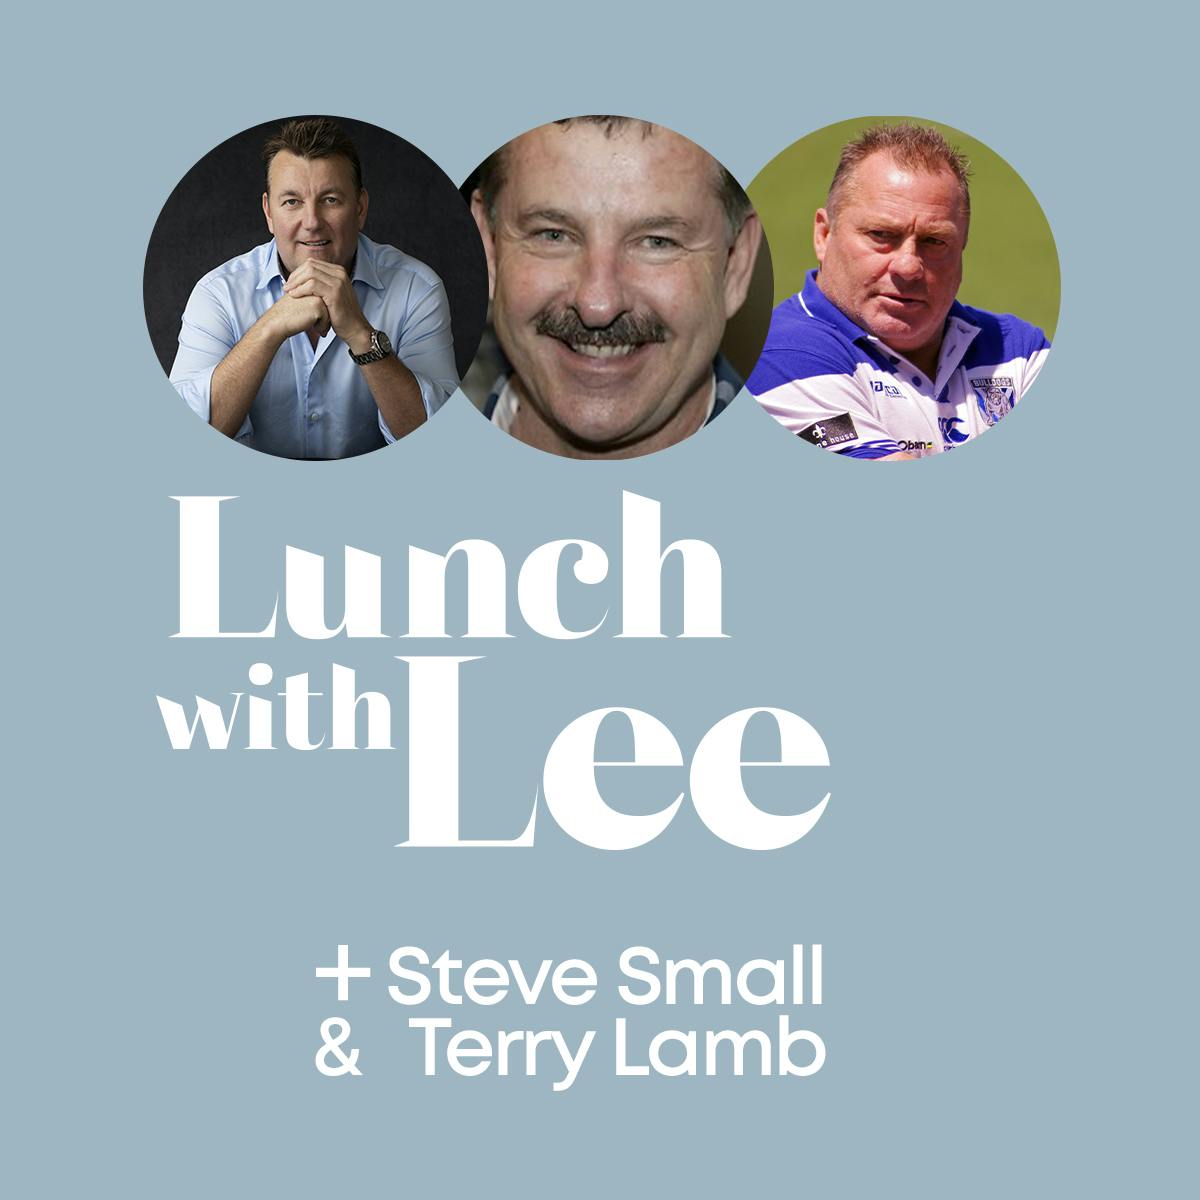 Lunch with Steve Small & Terry Lamb